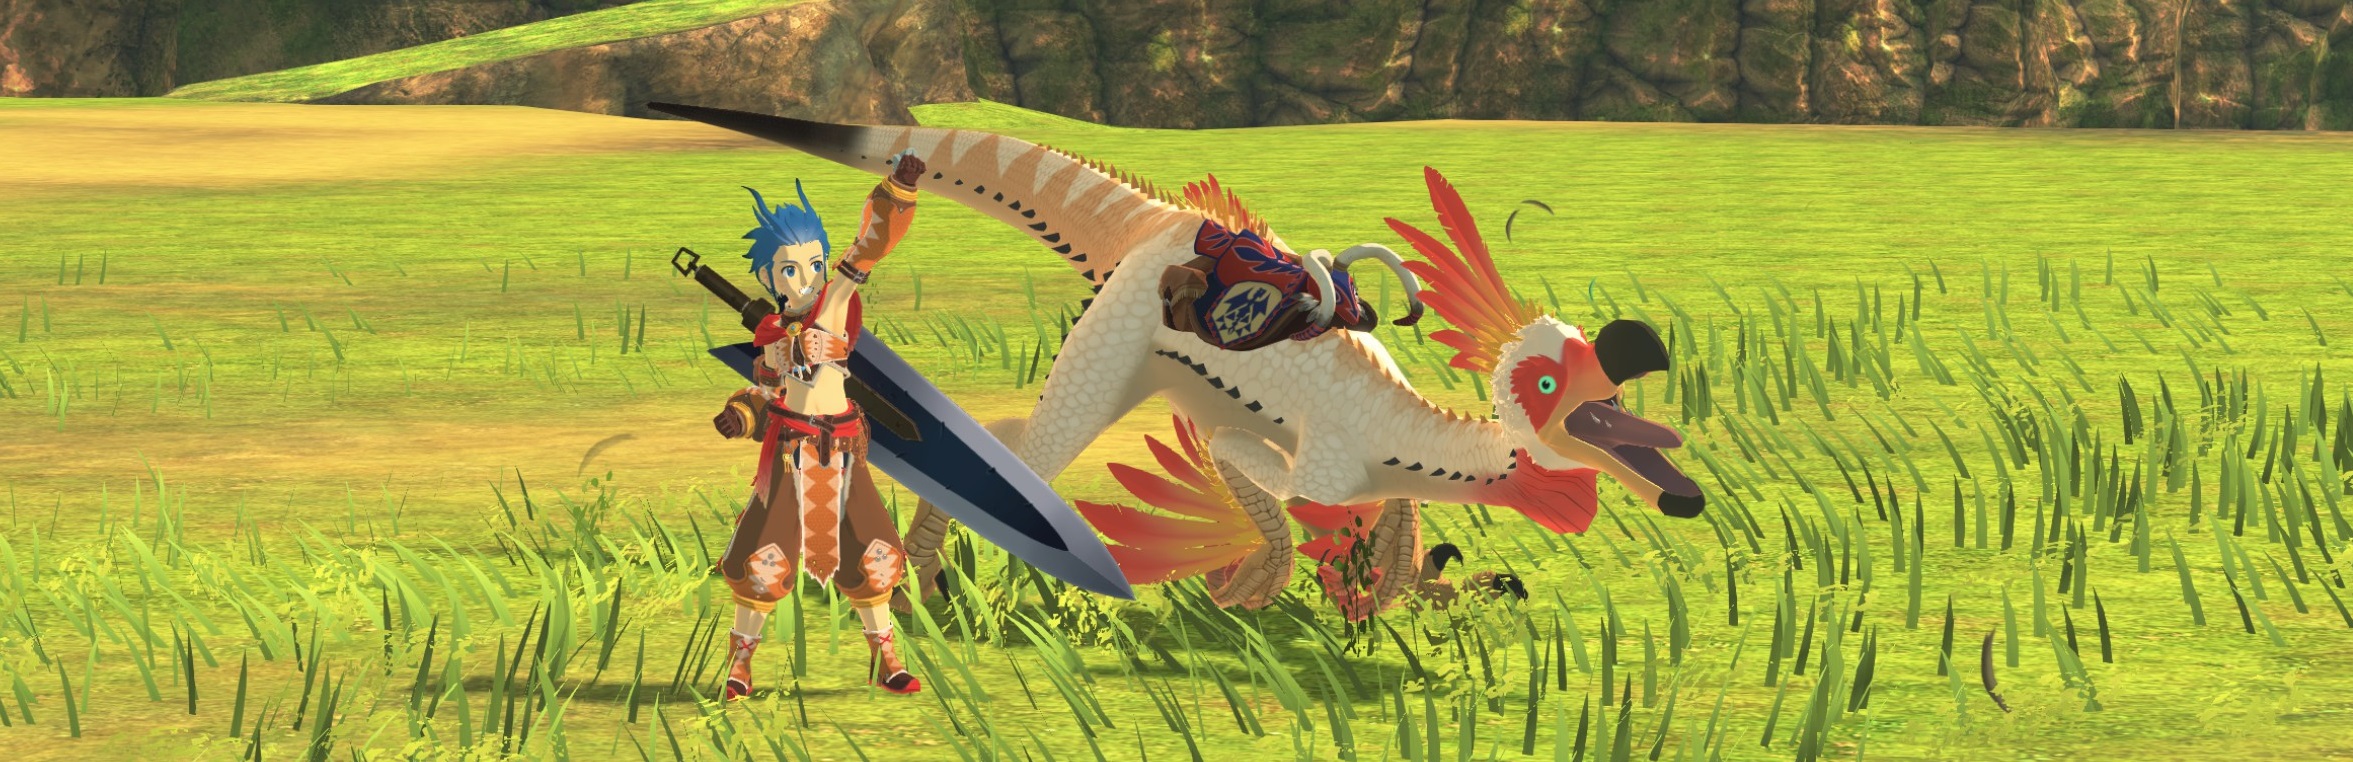 Monster Hunter Stories 2: Wings of Ruin - Unlock All Achievements Guide + Tips - Hope you found this helpful ^^